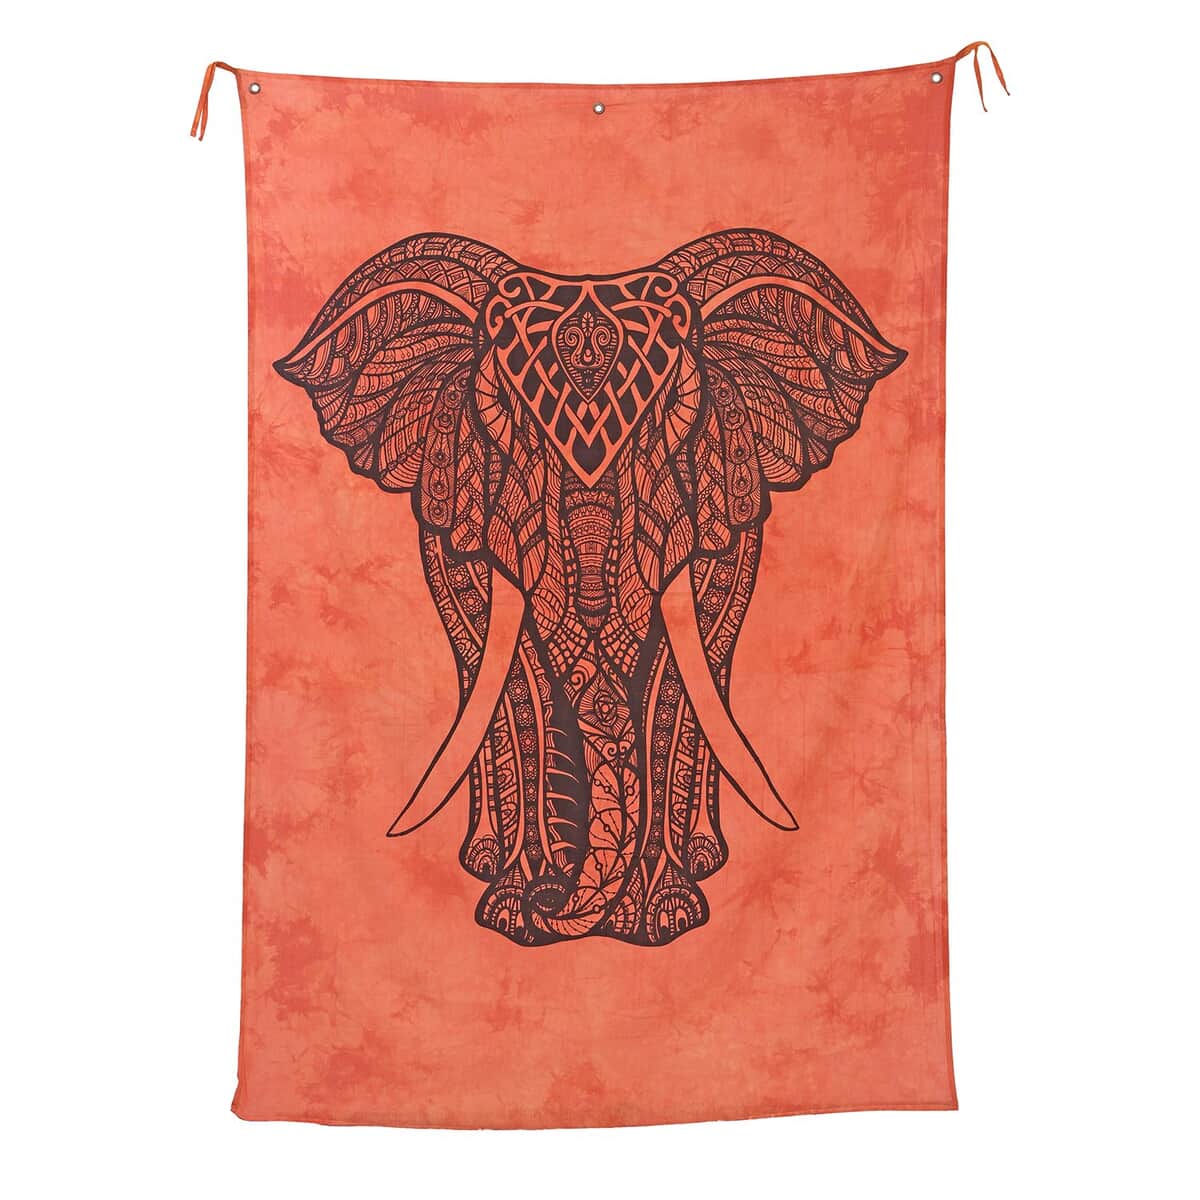 7272337-"100% Cotton Screen Printed Tie Dye Tapestry Wall Hanging Design: Elephant Color: Orange Size: 82x52 inches" image number 0